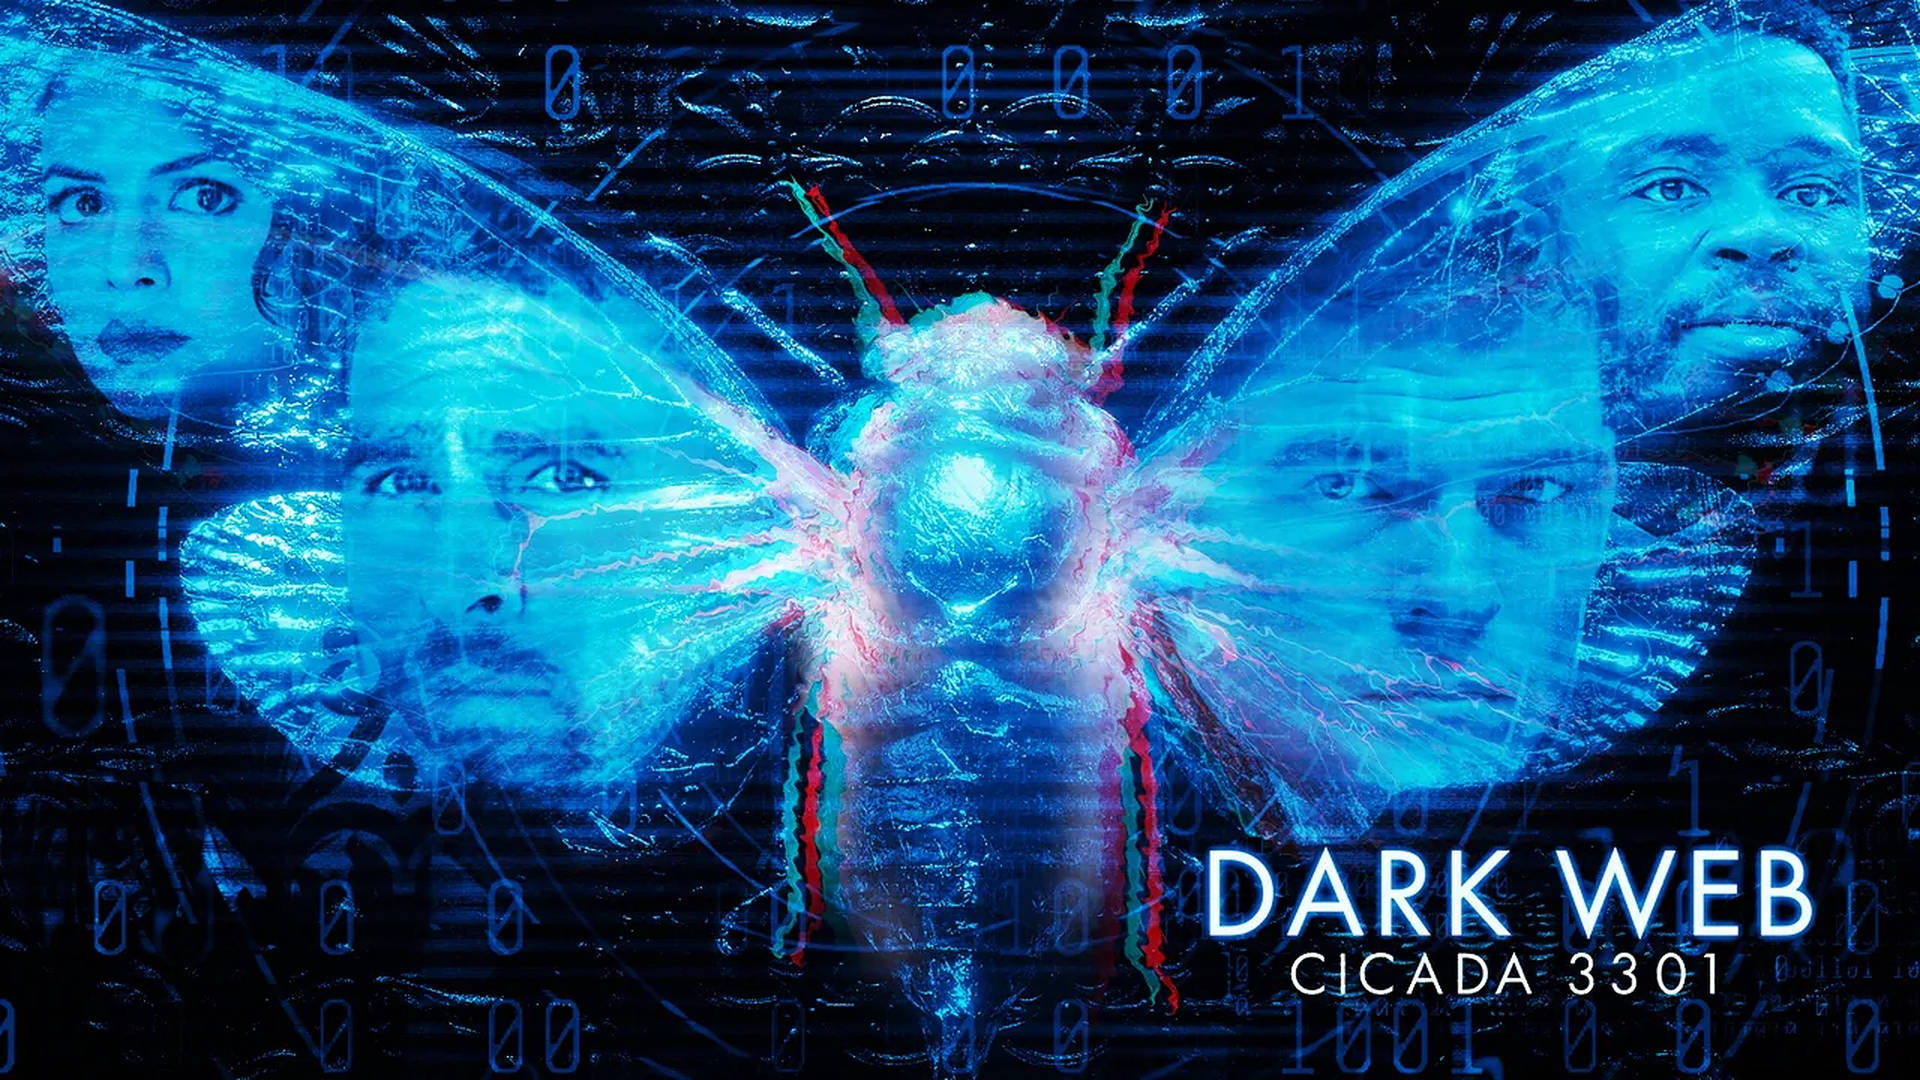 Mysterious Cicada 3301 Symbol in the Shadows of the Dark Web Wallpaper